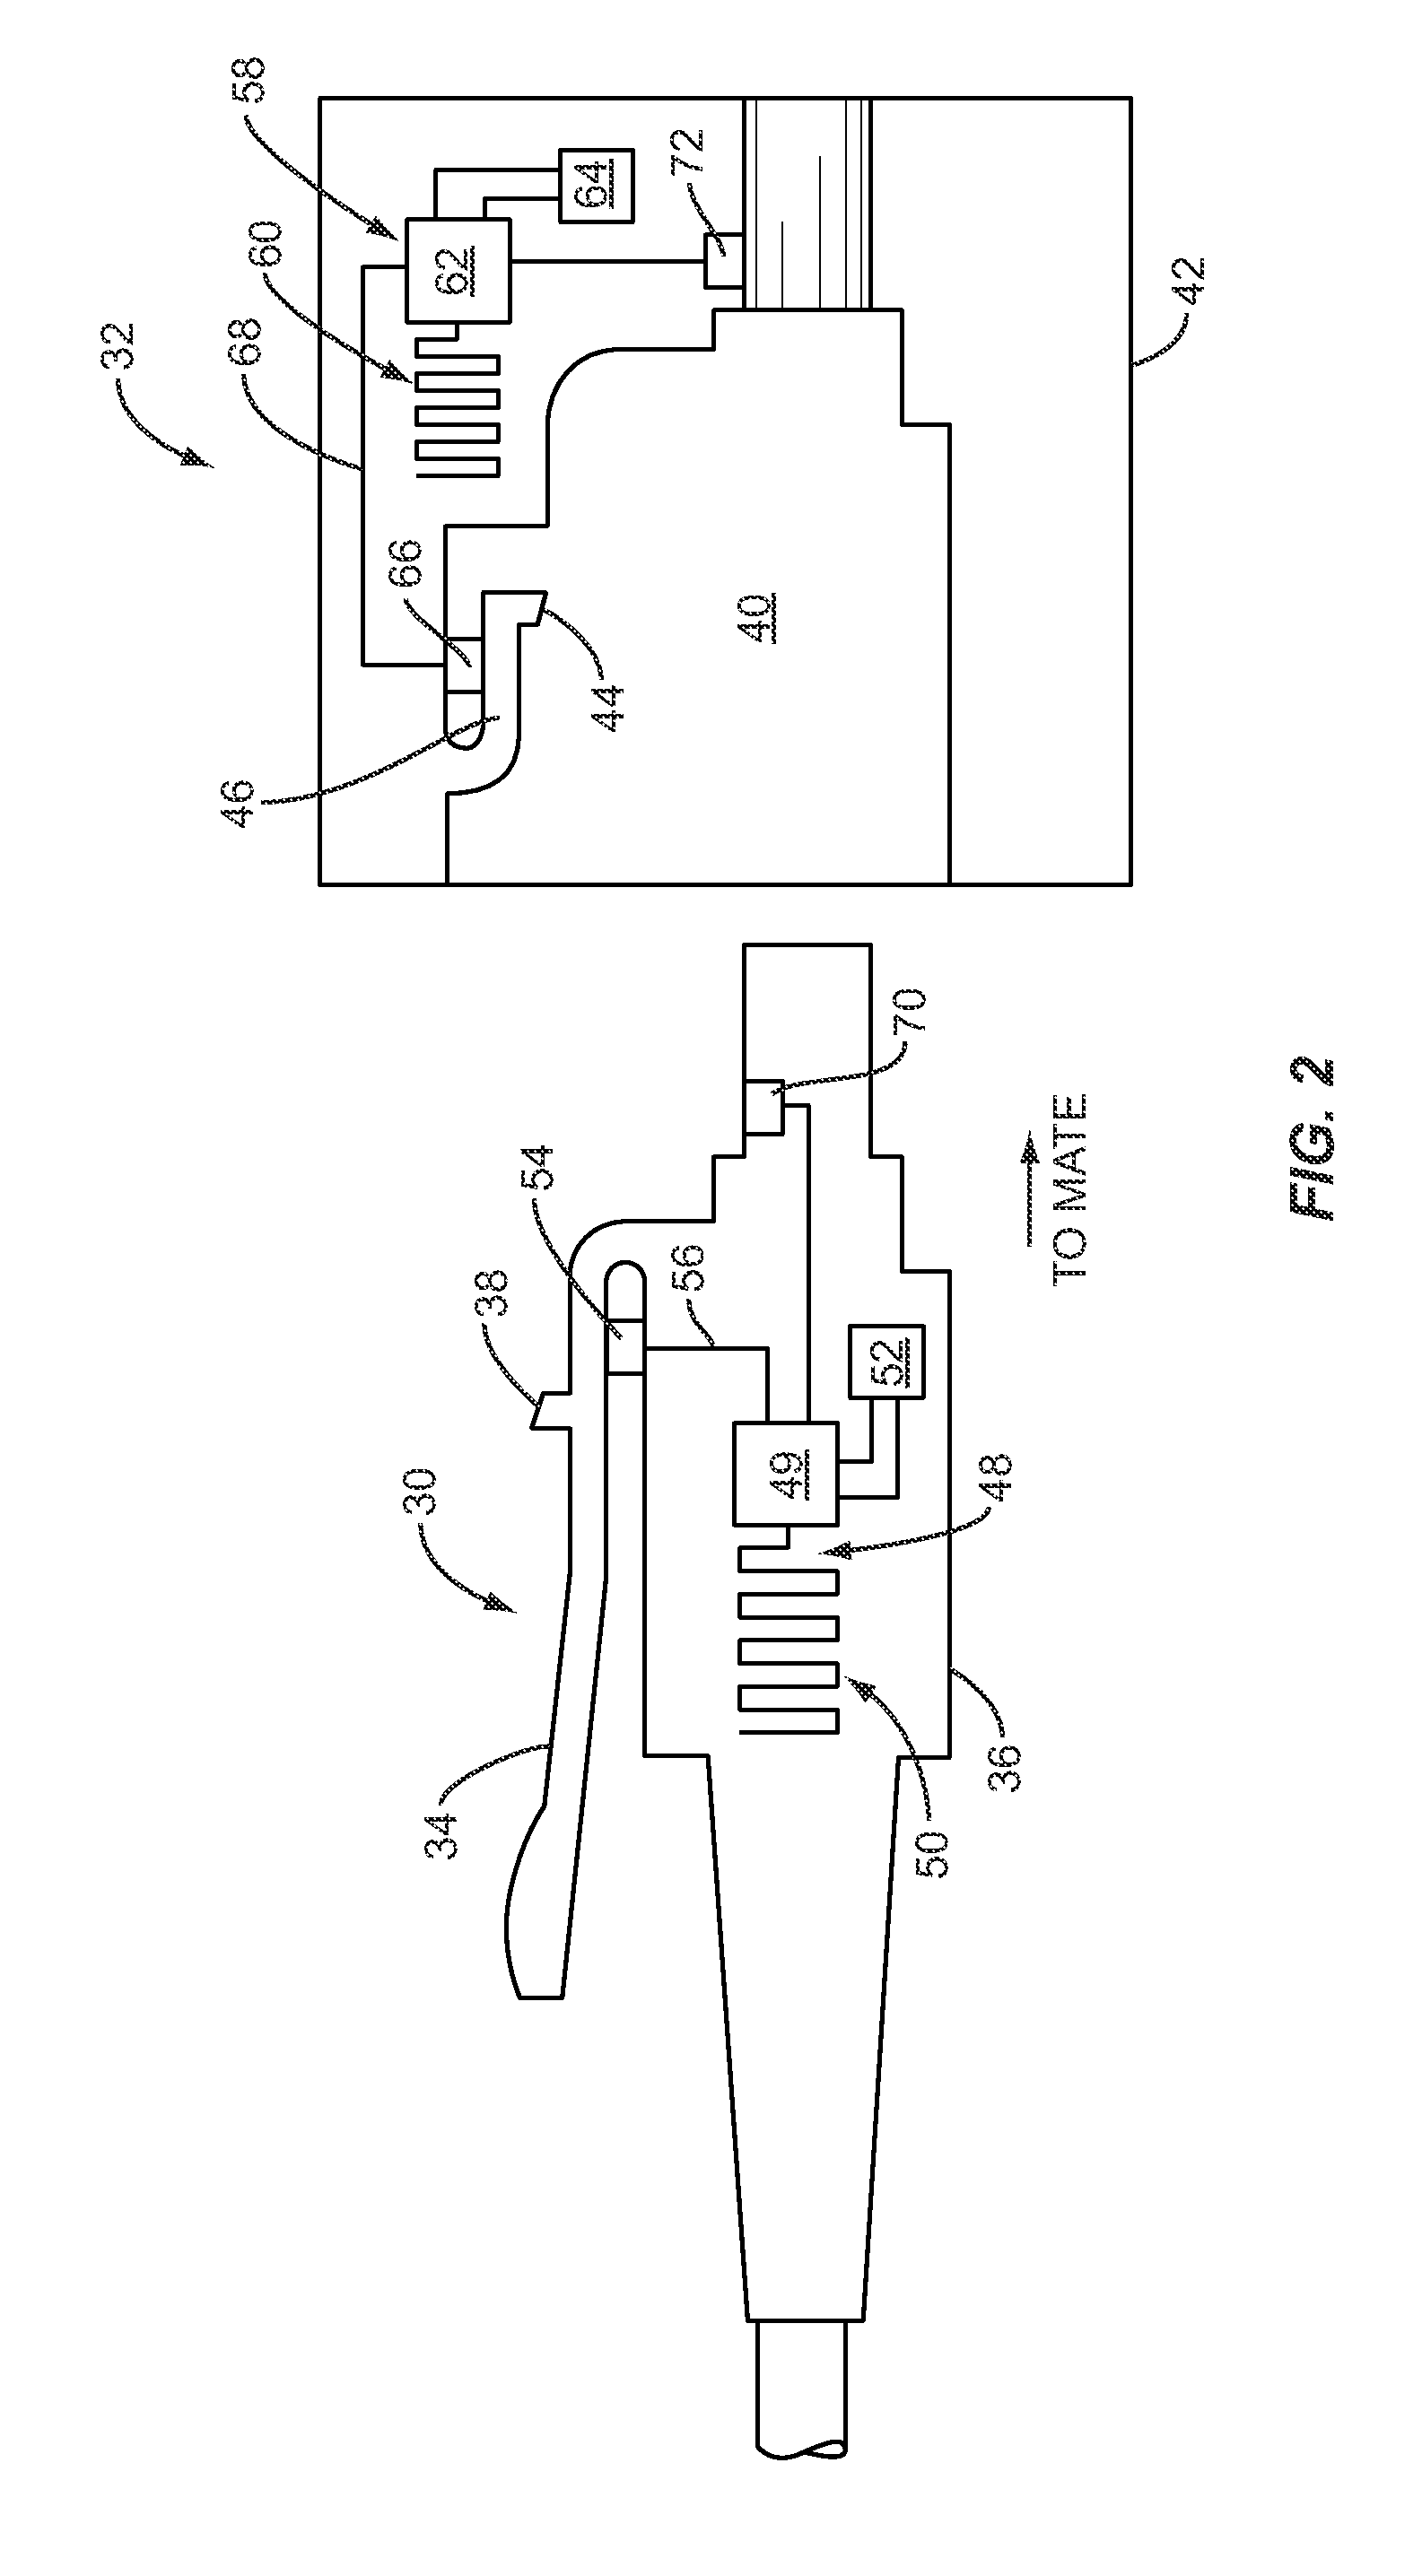 Radio frequency (RF)-enabled latches and related components, assemblies, systems, and methods